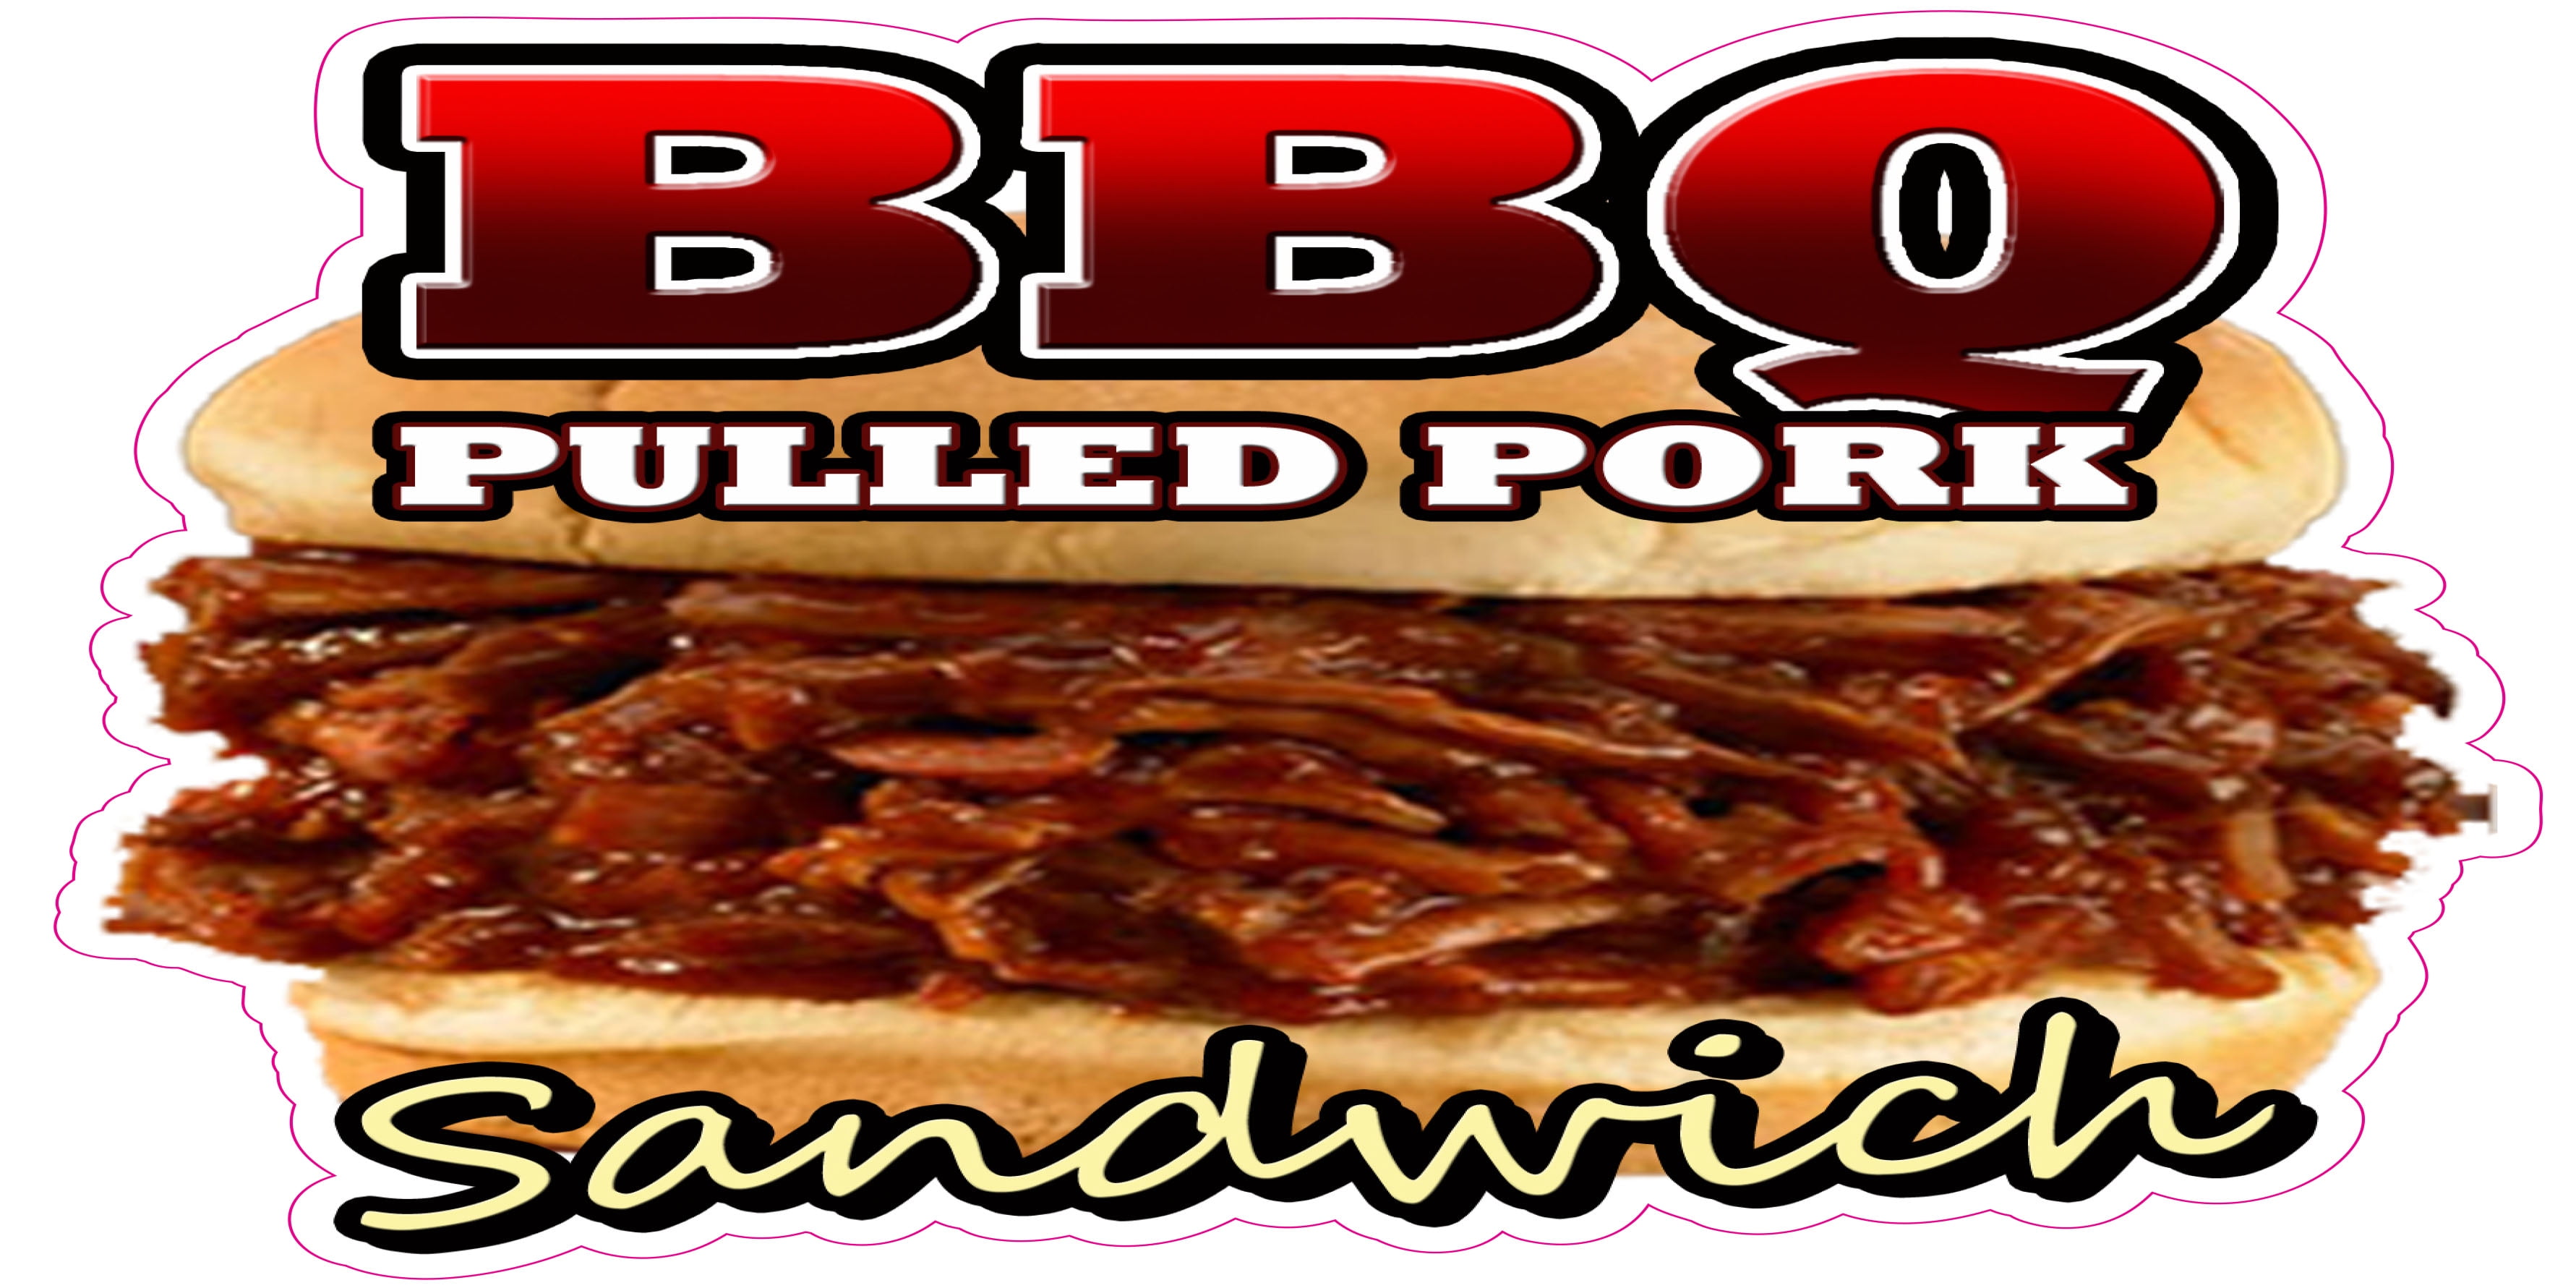 Pulled Pork Sandwich Decal 14" BBQ Barbeque Restaurant Concession Food Truck 